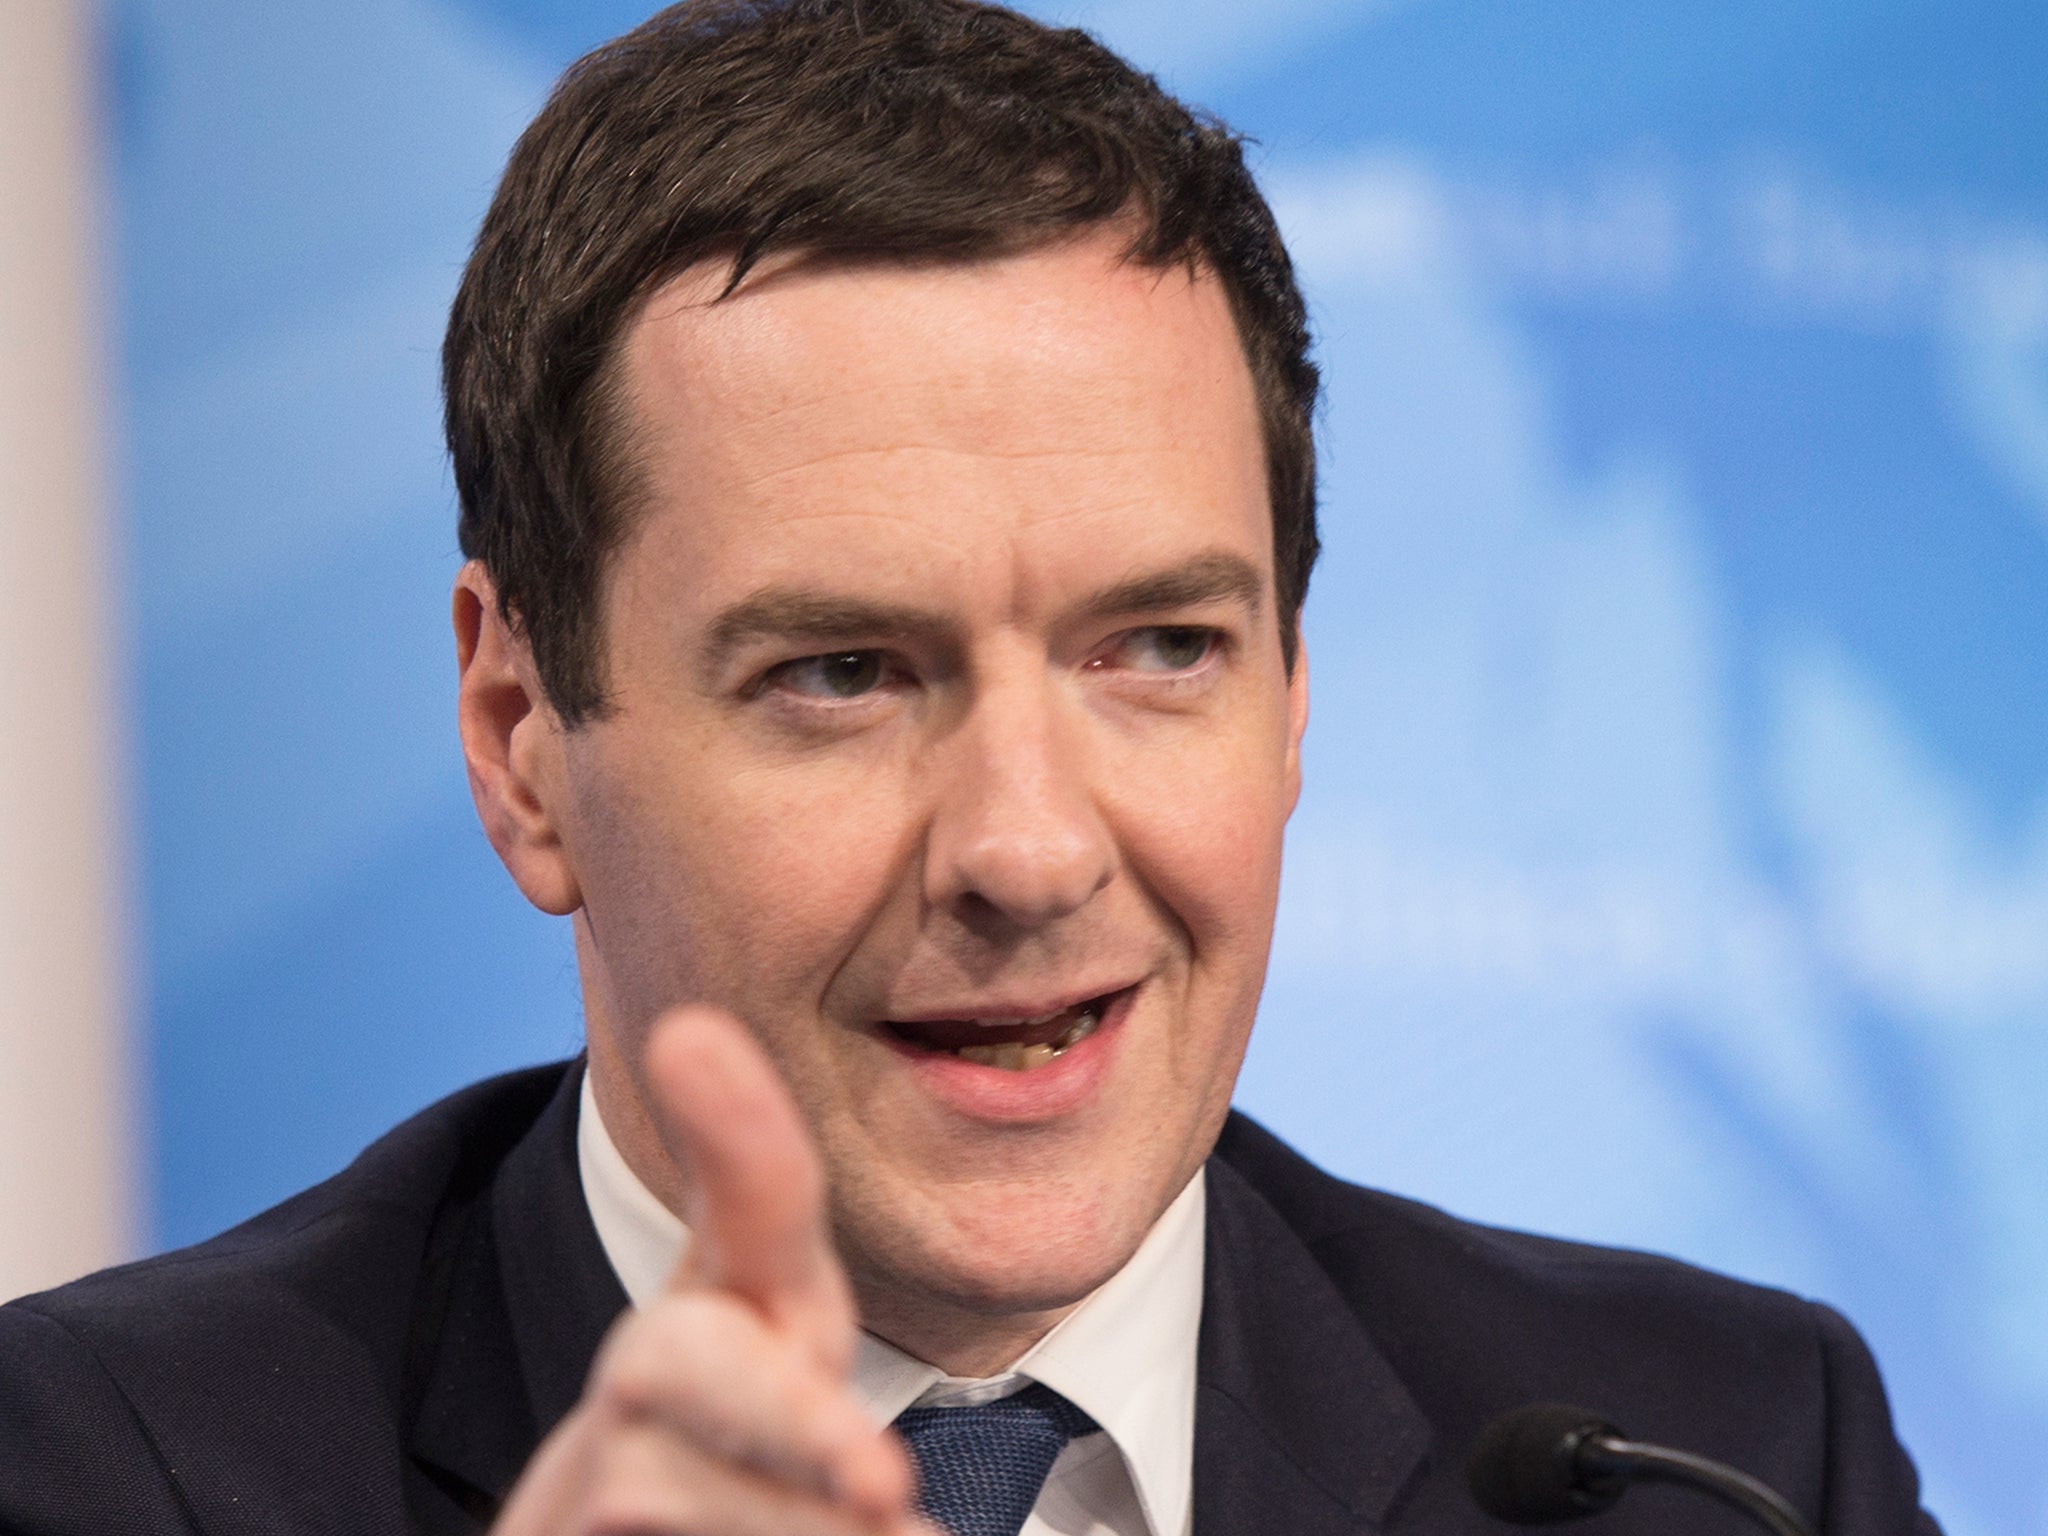 Chancellor George Osborne was to press ahead with the share sale to the public in the spring, but decided to postpone it